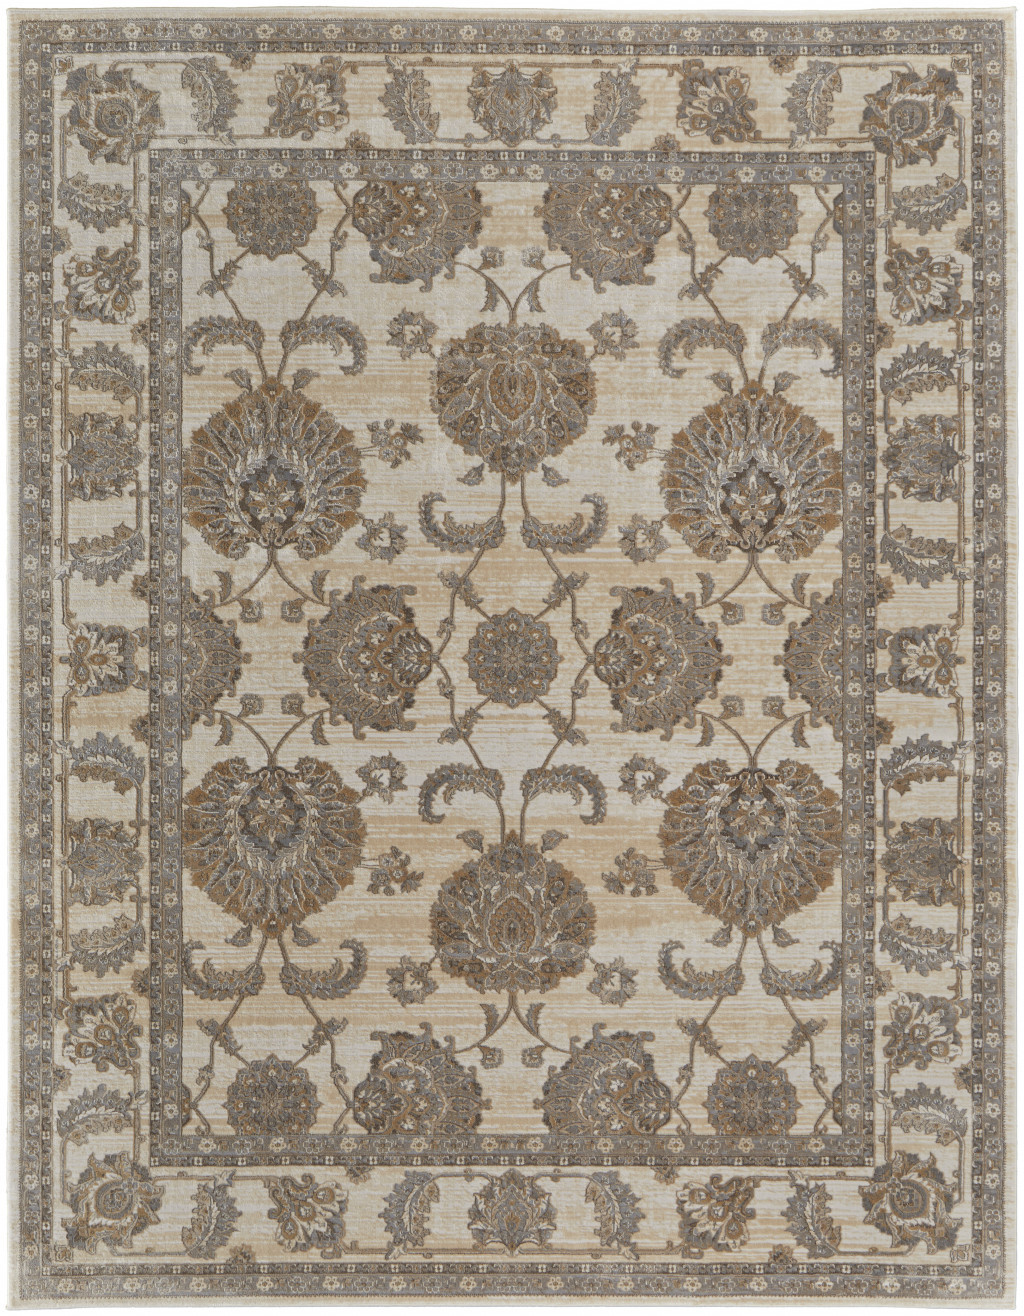 4' X 6' Tan Ivory And Brown Power Loom Area Rug-515498-1